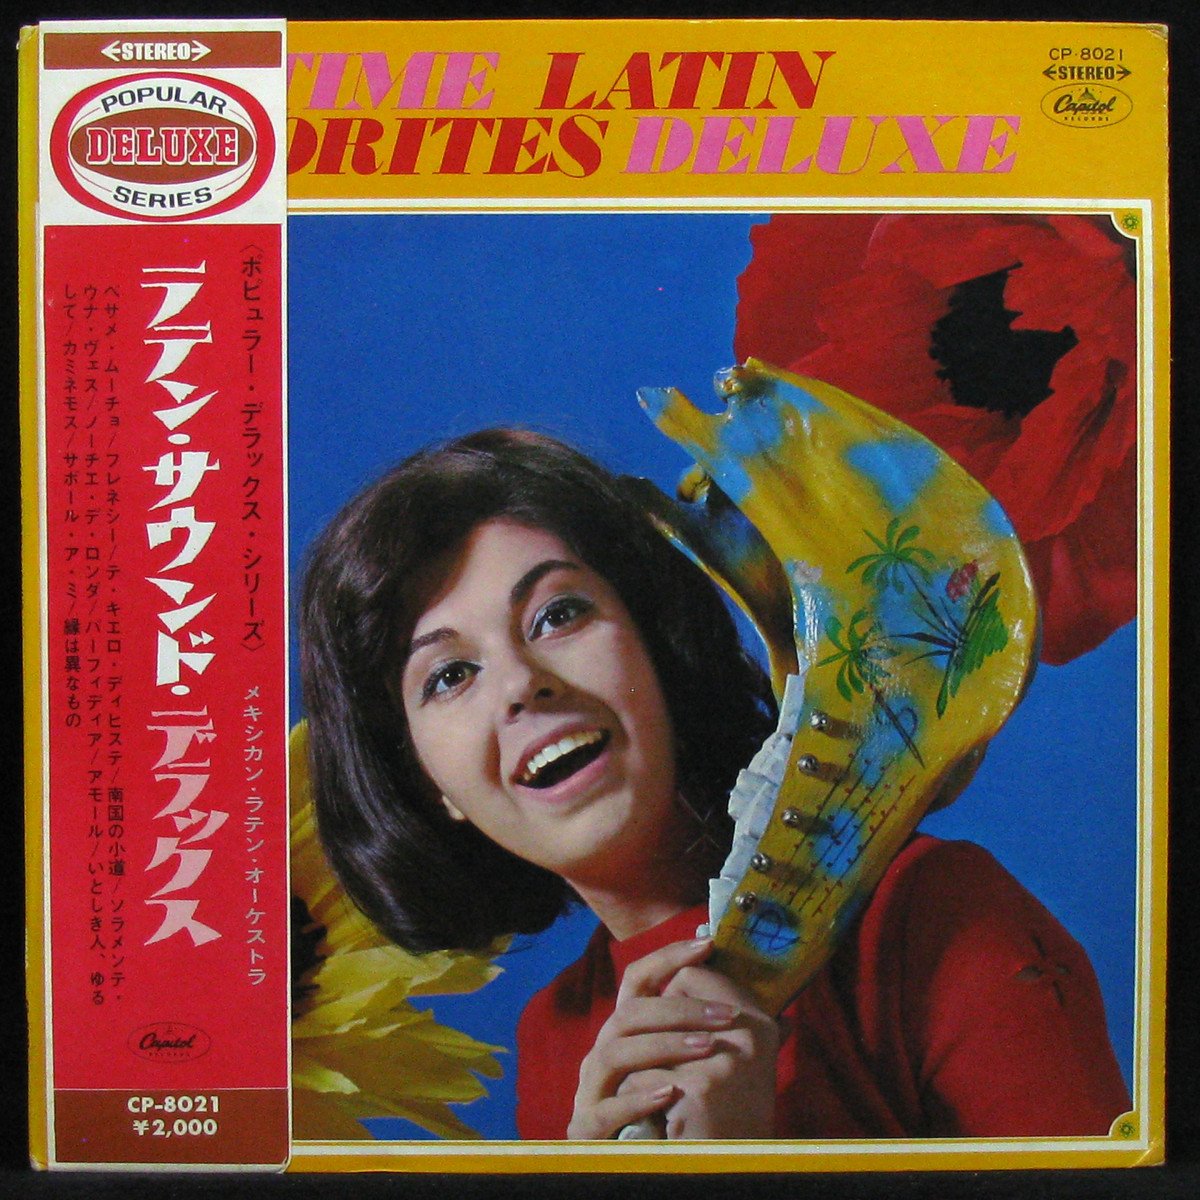 All Time Latin Favorites Deluxe